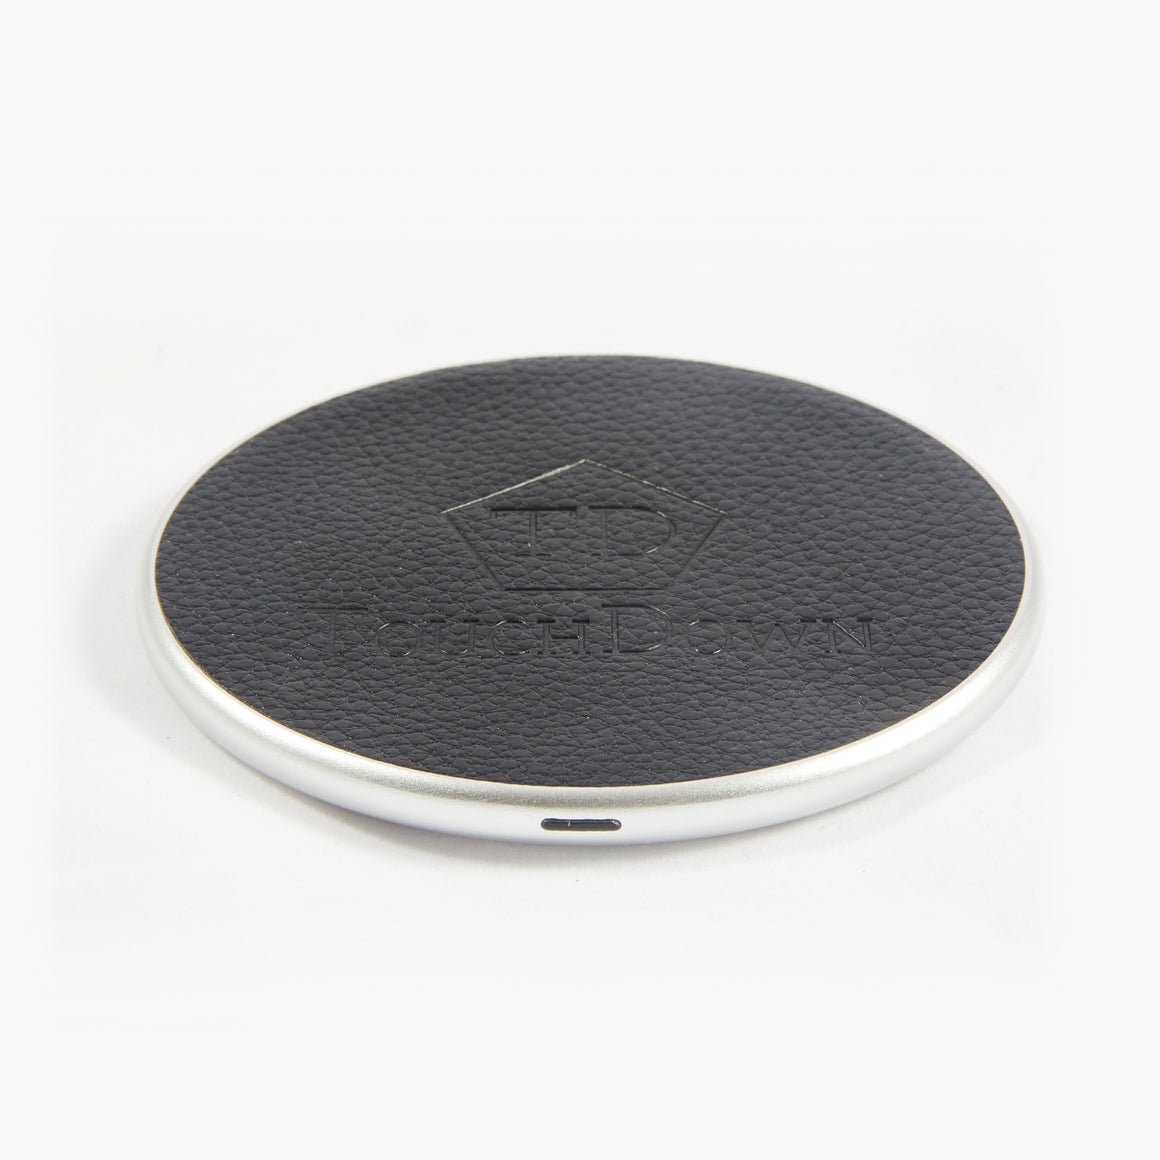 Circular Leather Charging Pad - Business Edition - Black - TouchDown Charging